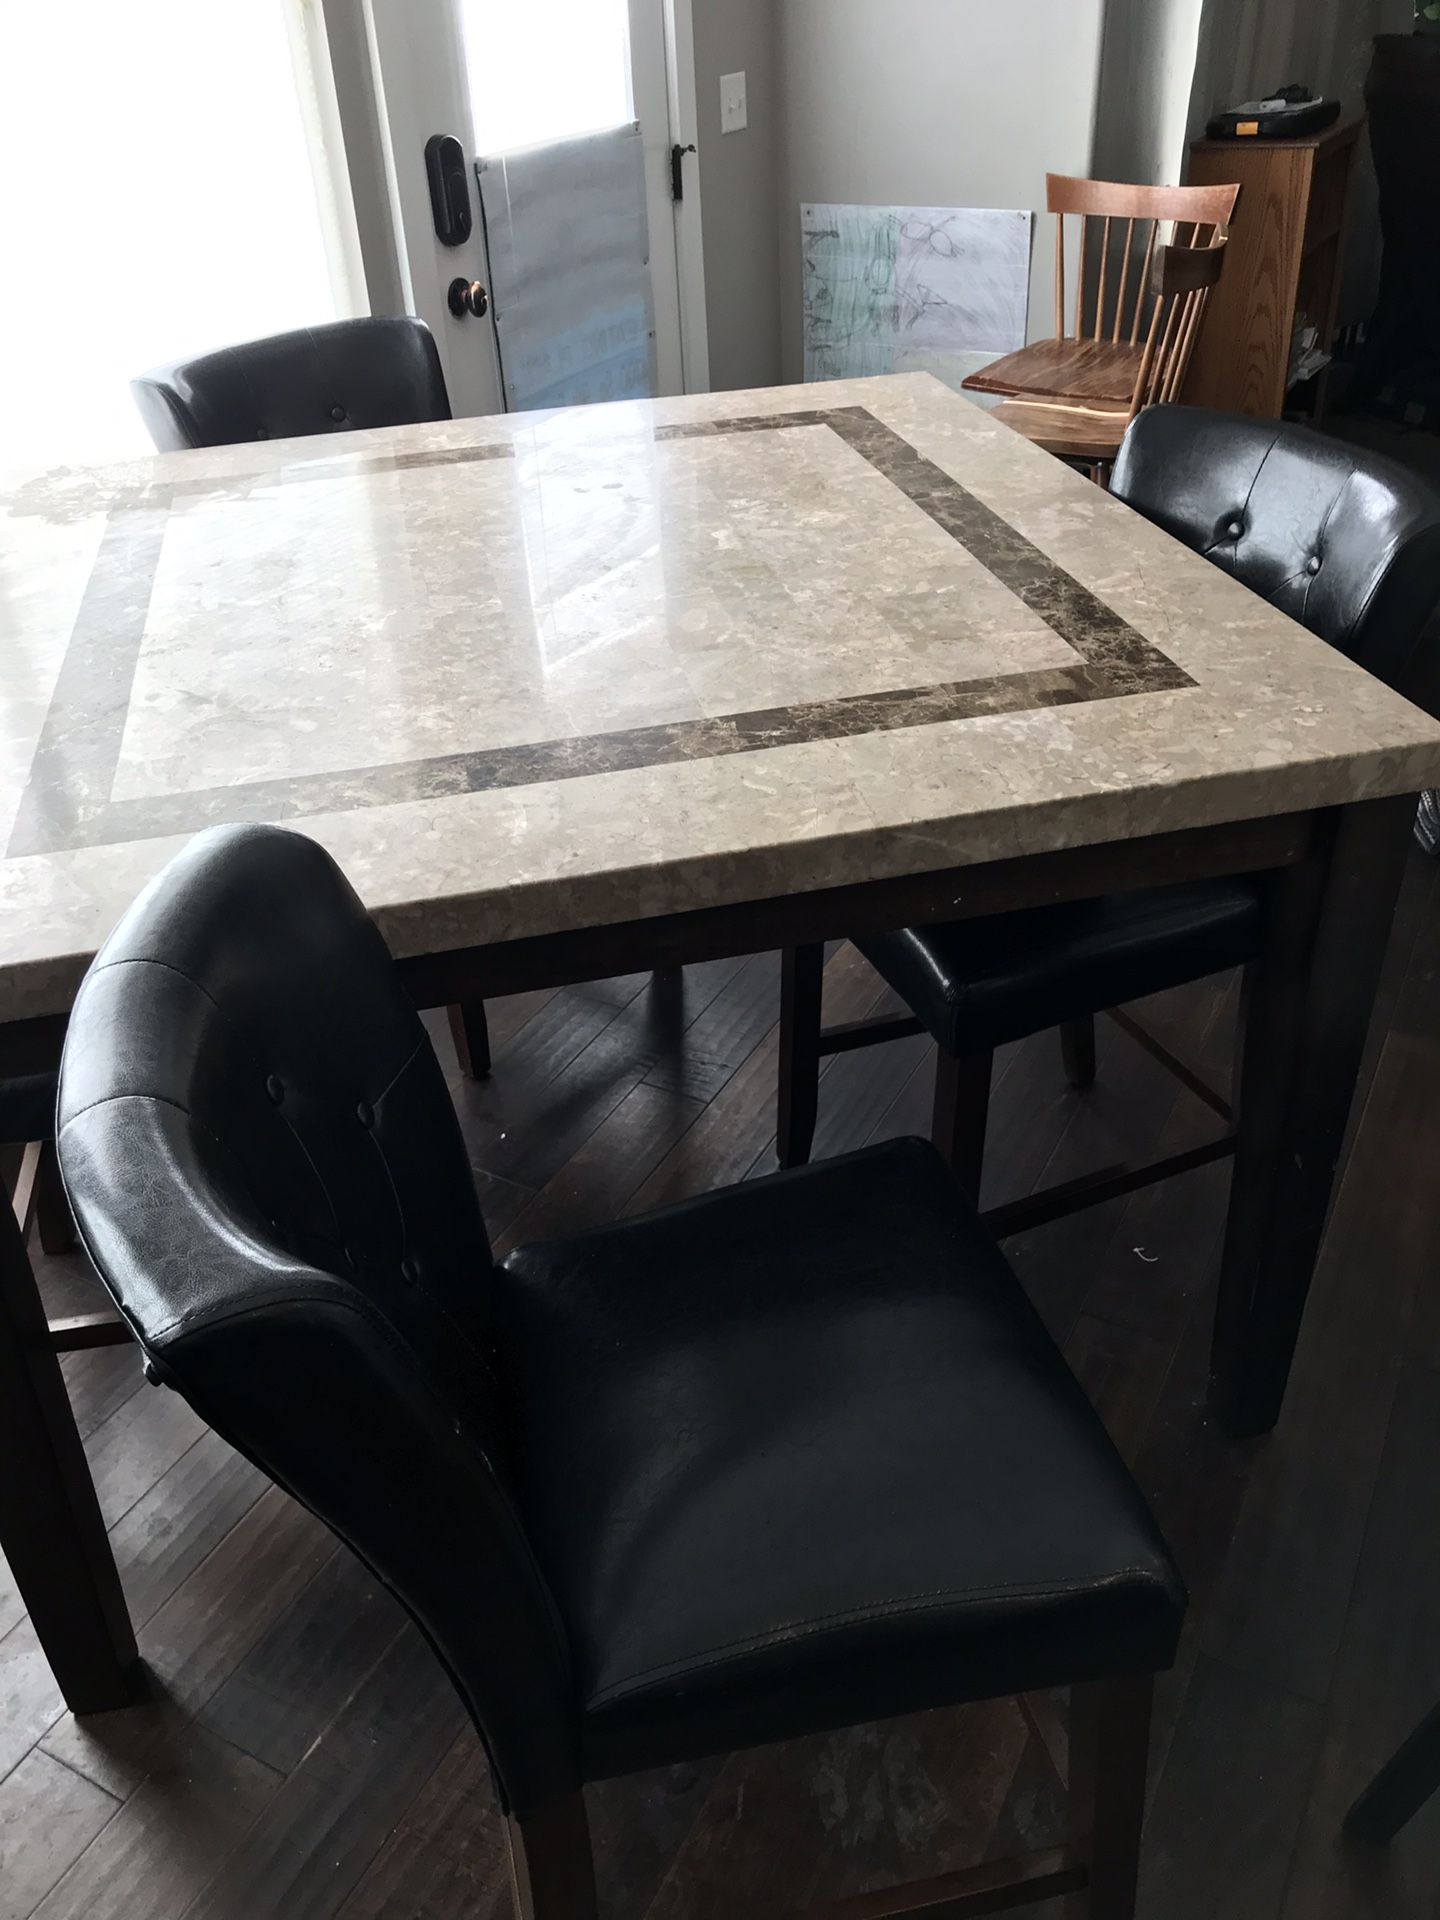 Marbled kitchen table and 4 Leather chairs.